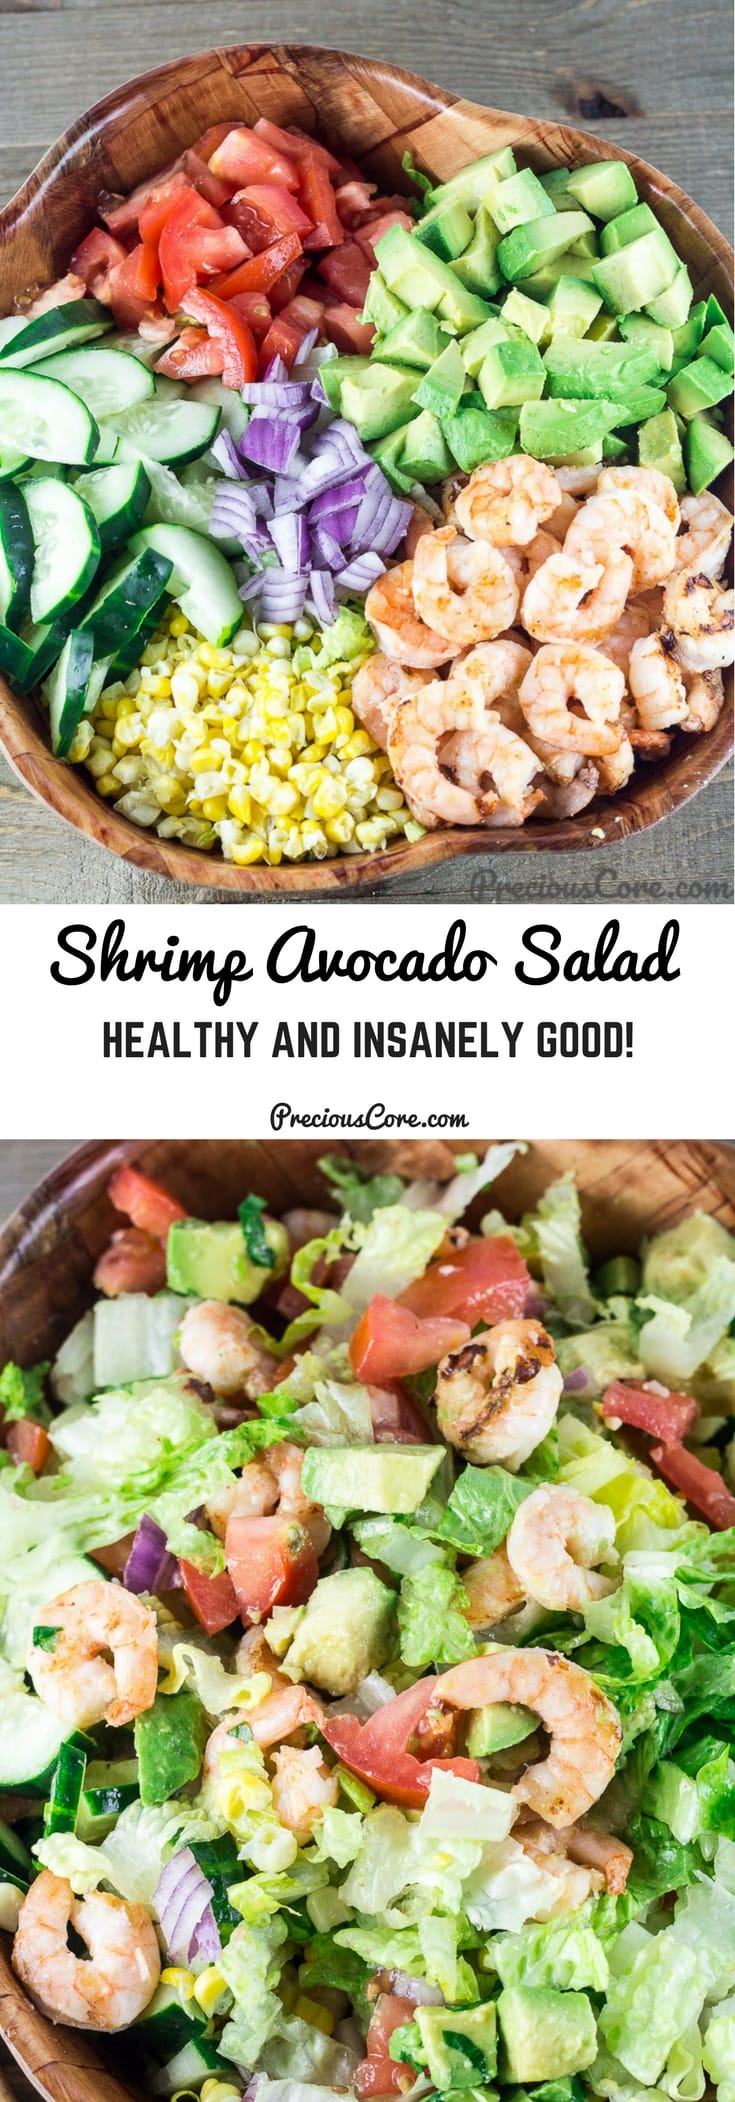 This Shrimp Avocado Salad is so tasty, fresh, filling, and so easy to make. The citrus dressing that goes on top is to die for. Make this for a quick dinner or an appetizer. Get the recipe on Precious Core. #salads #healthy #seafood #veggies